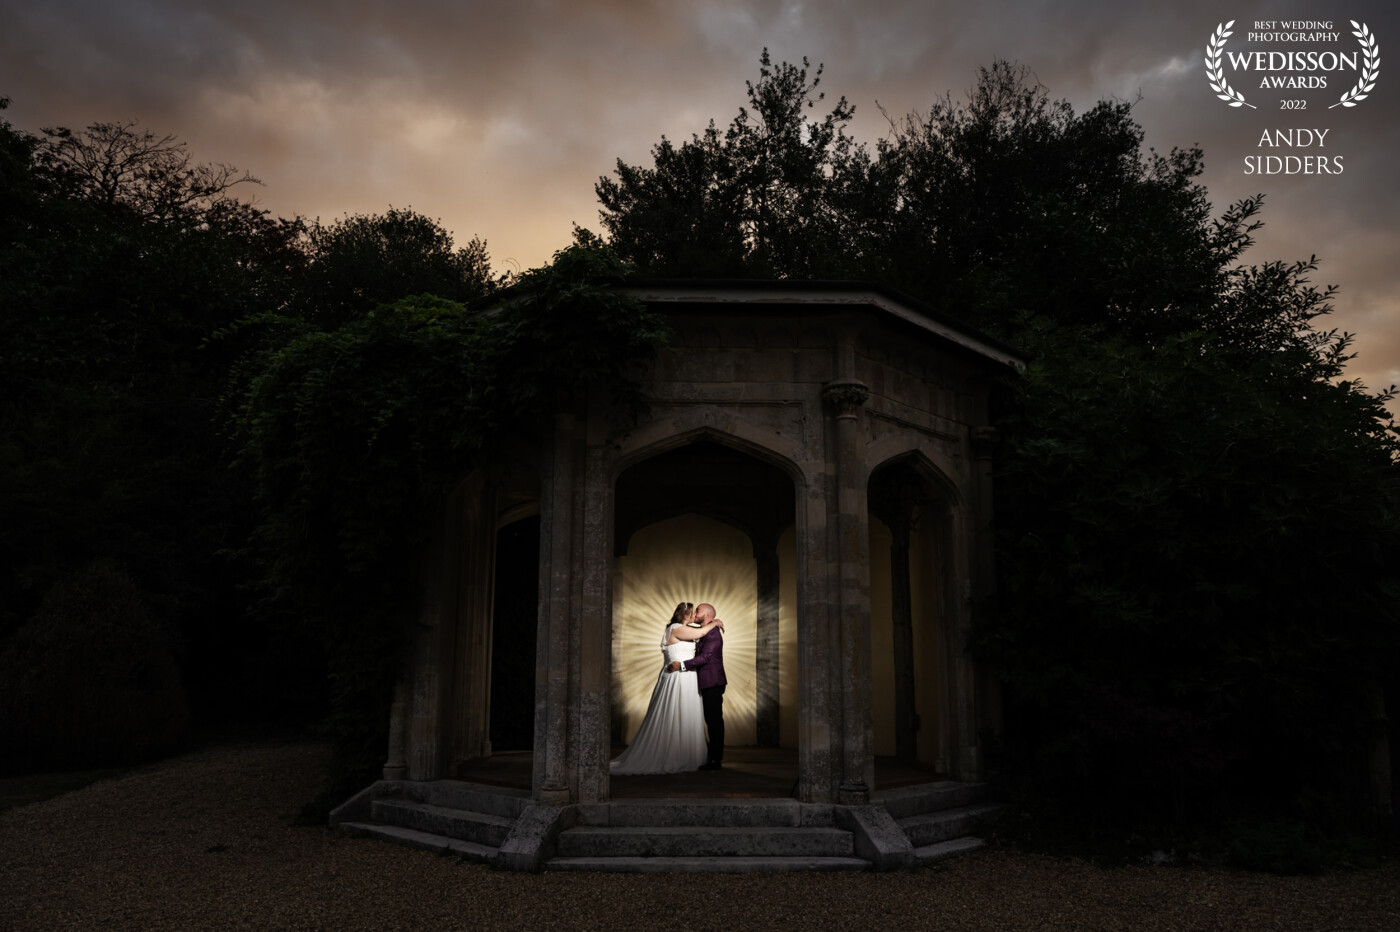 This night time shot was taken at Shendish Manor Hotel in Hertfordshire. I used a Magbeam to project a pattern on the stone gazebo wall behind the couple and lit the couple with flash.